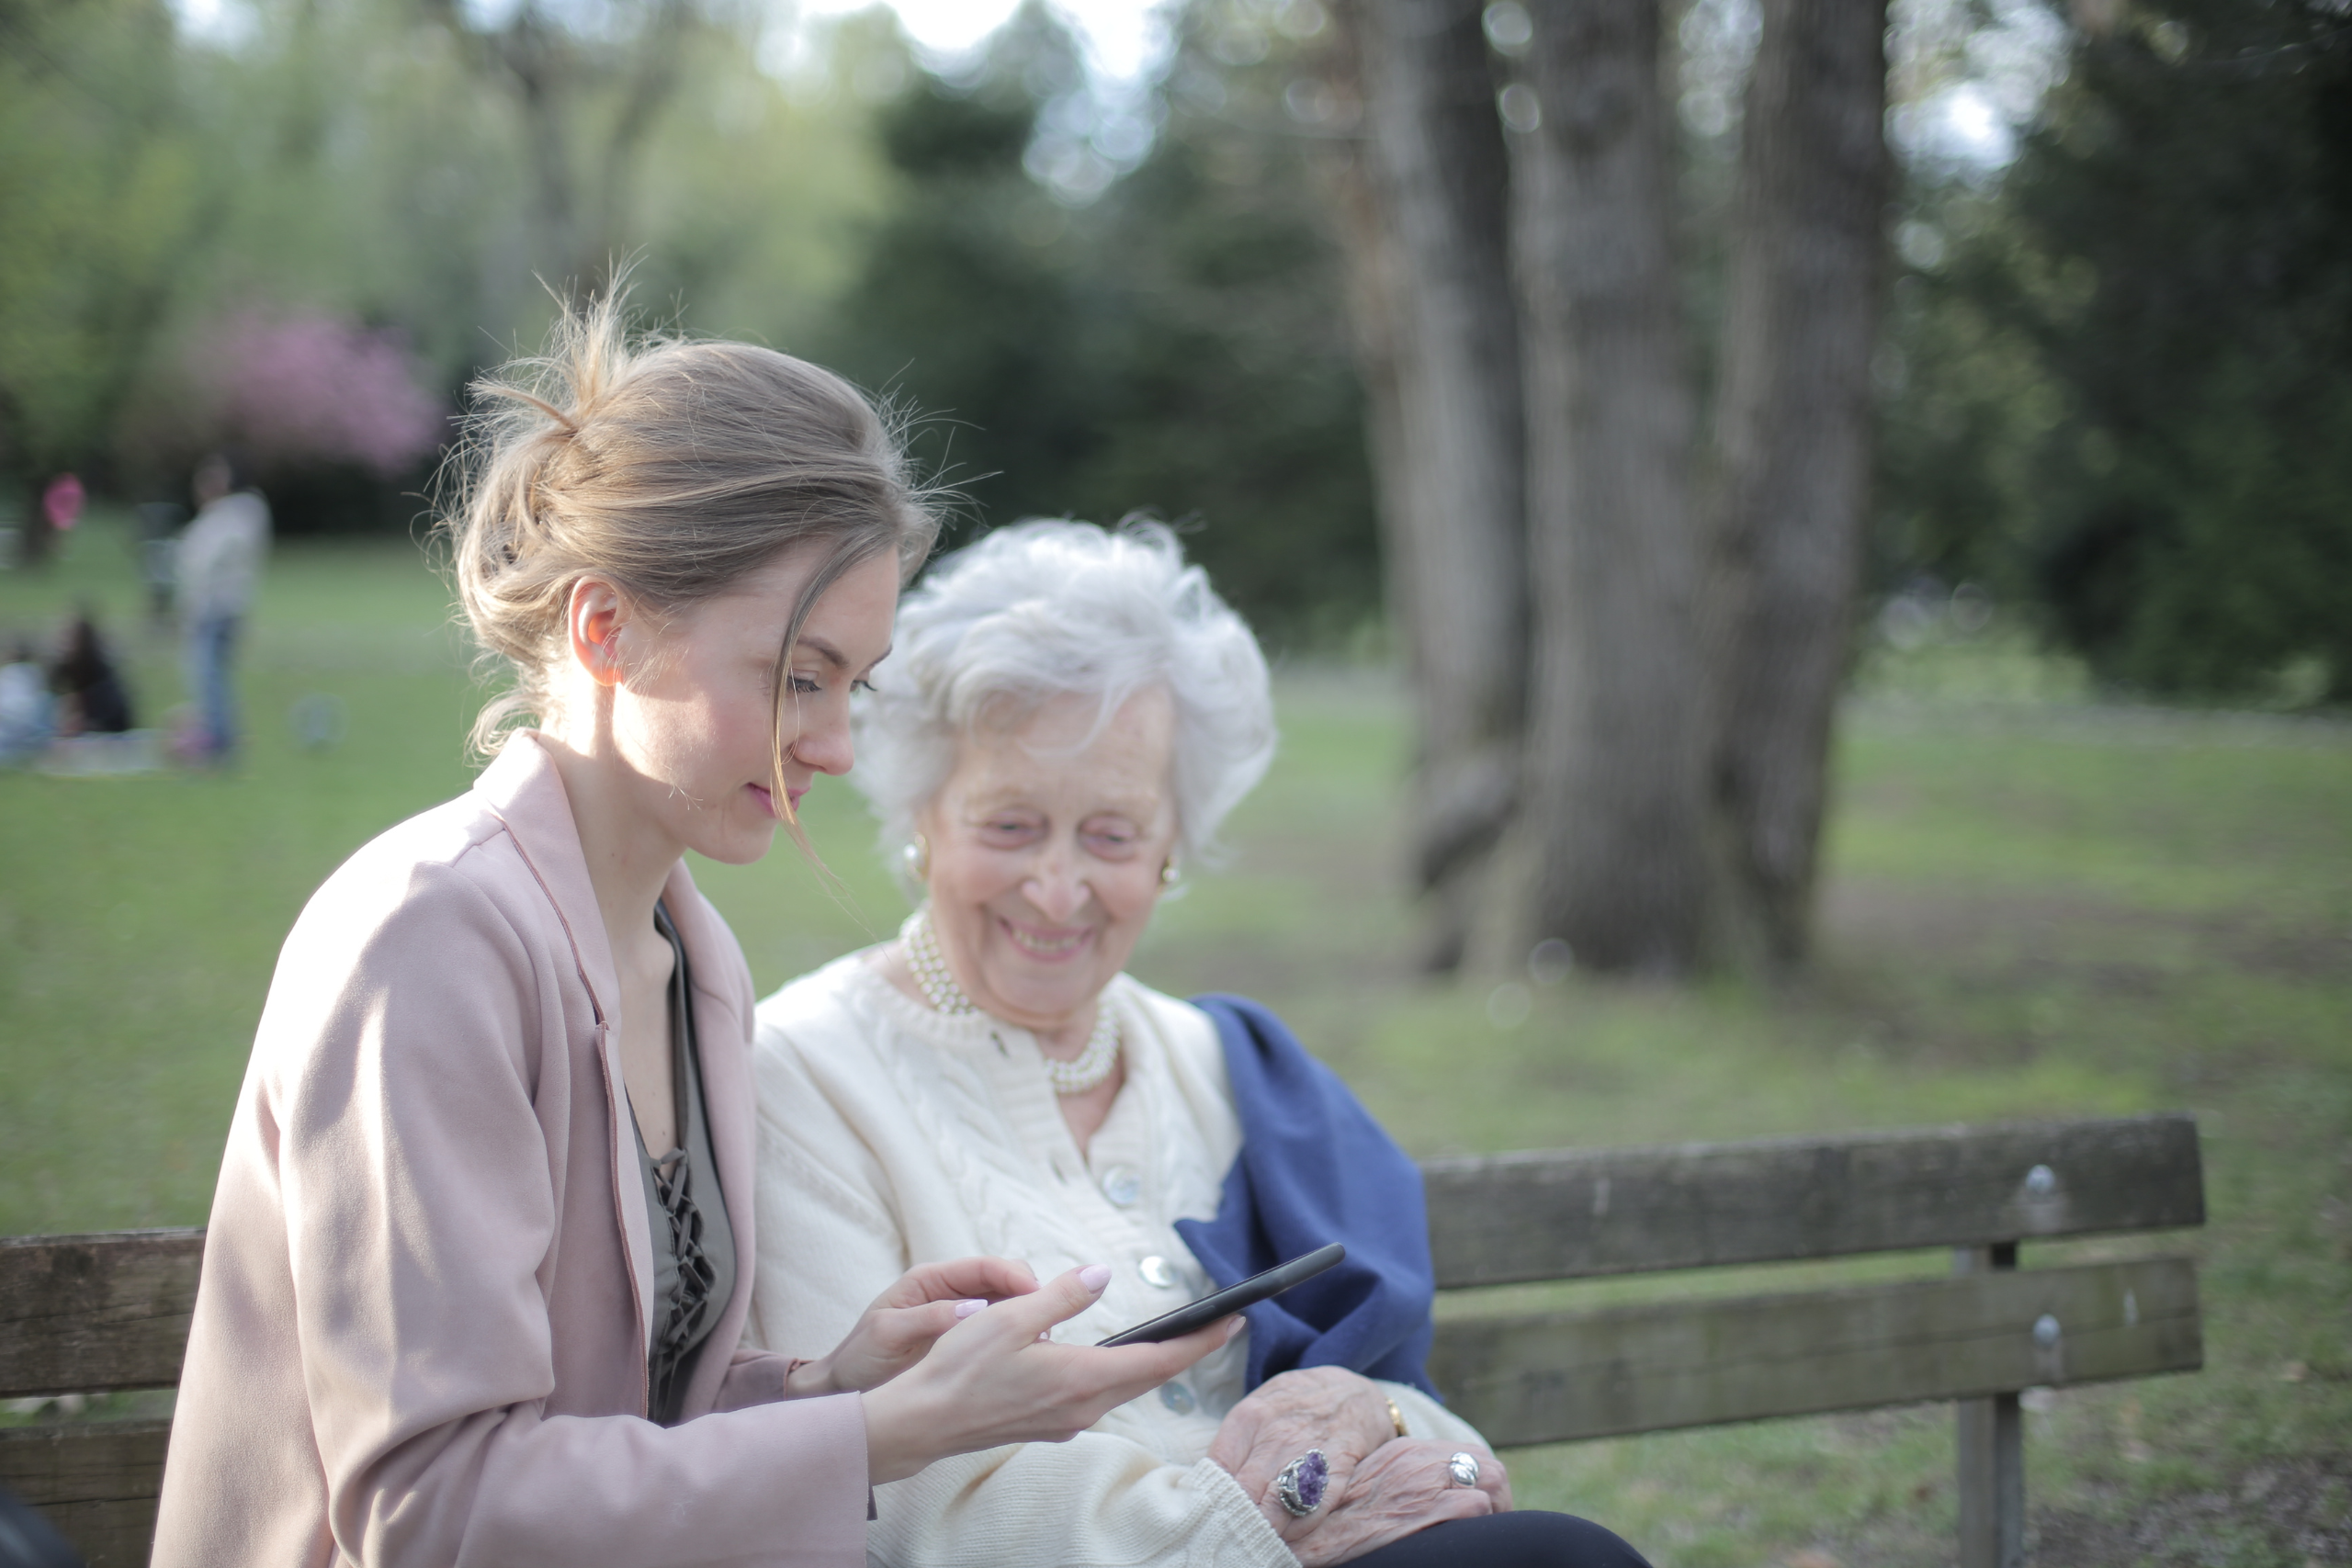 A younger woman and an older woman are seated on a bench in a park, sharing a moment of joy as the younger one shows something on a smartphone to the older woman. The older woman, who is smiling, appears to be enjoying the interaction or content being shown. The background is softly blurred, indicating a peaceful outdoor setting with trees and possibly other park-goers in the distance.